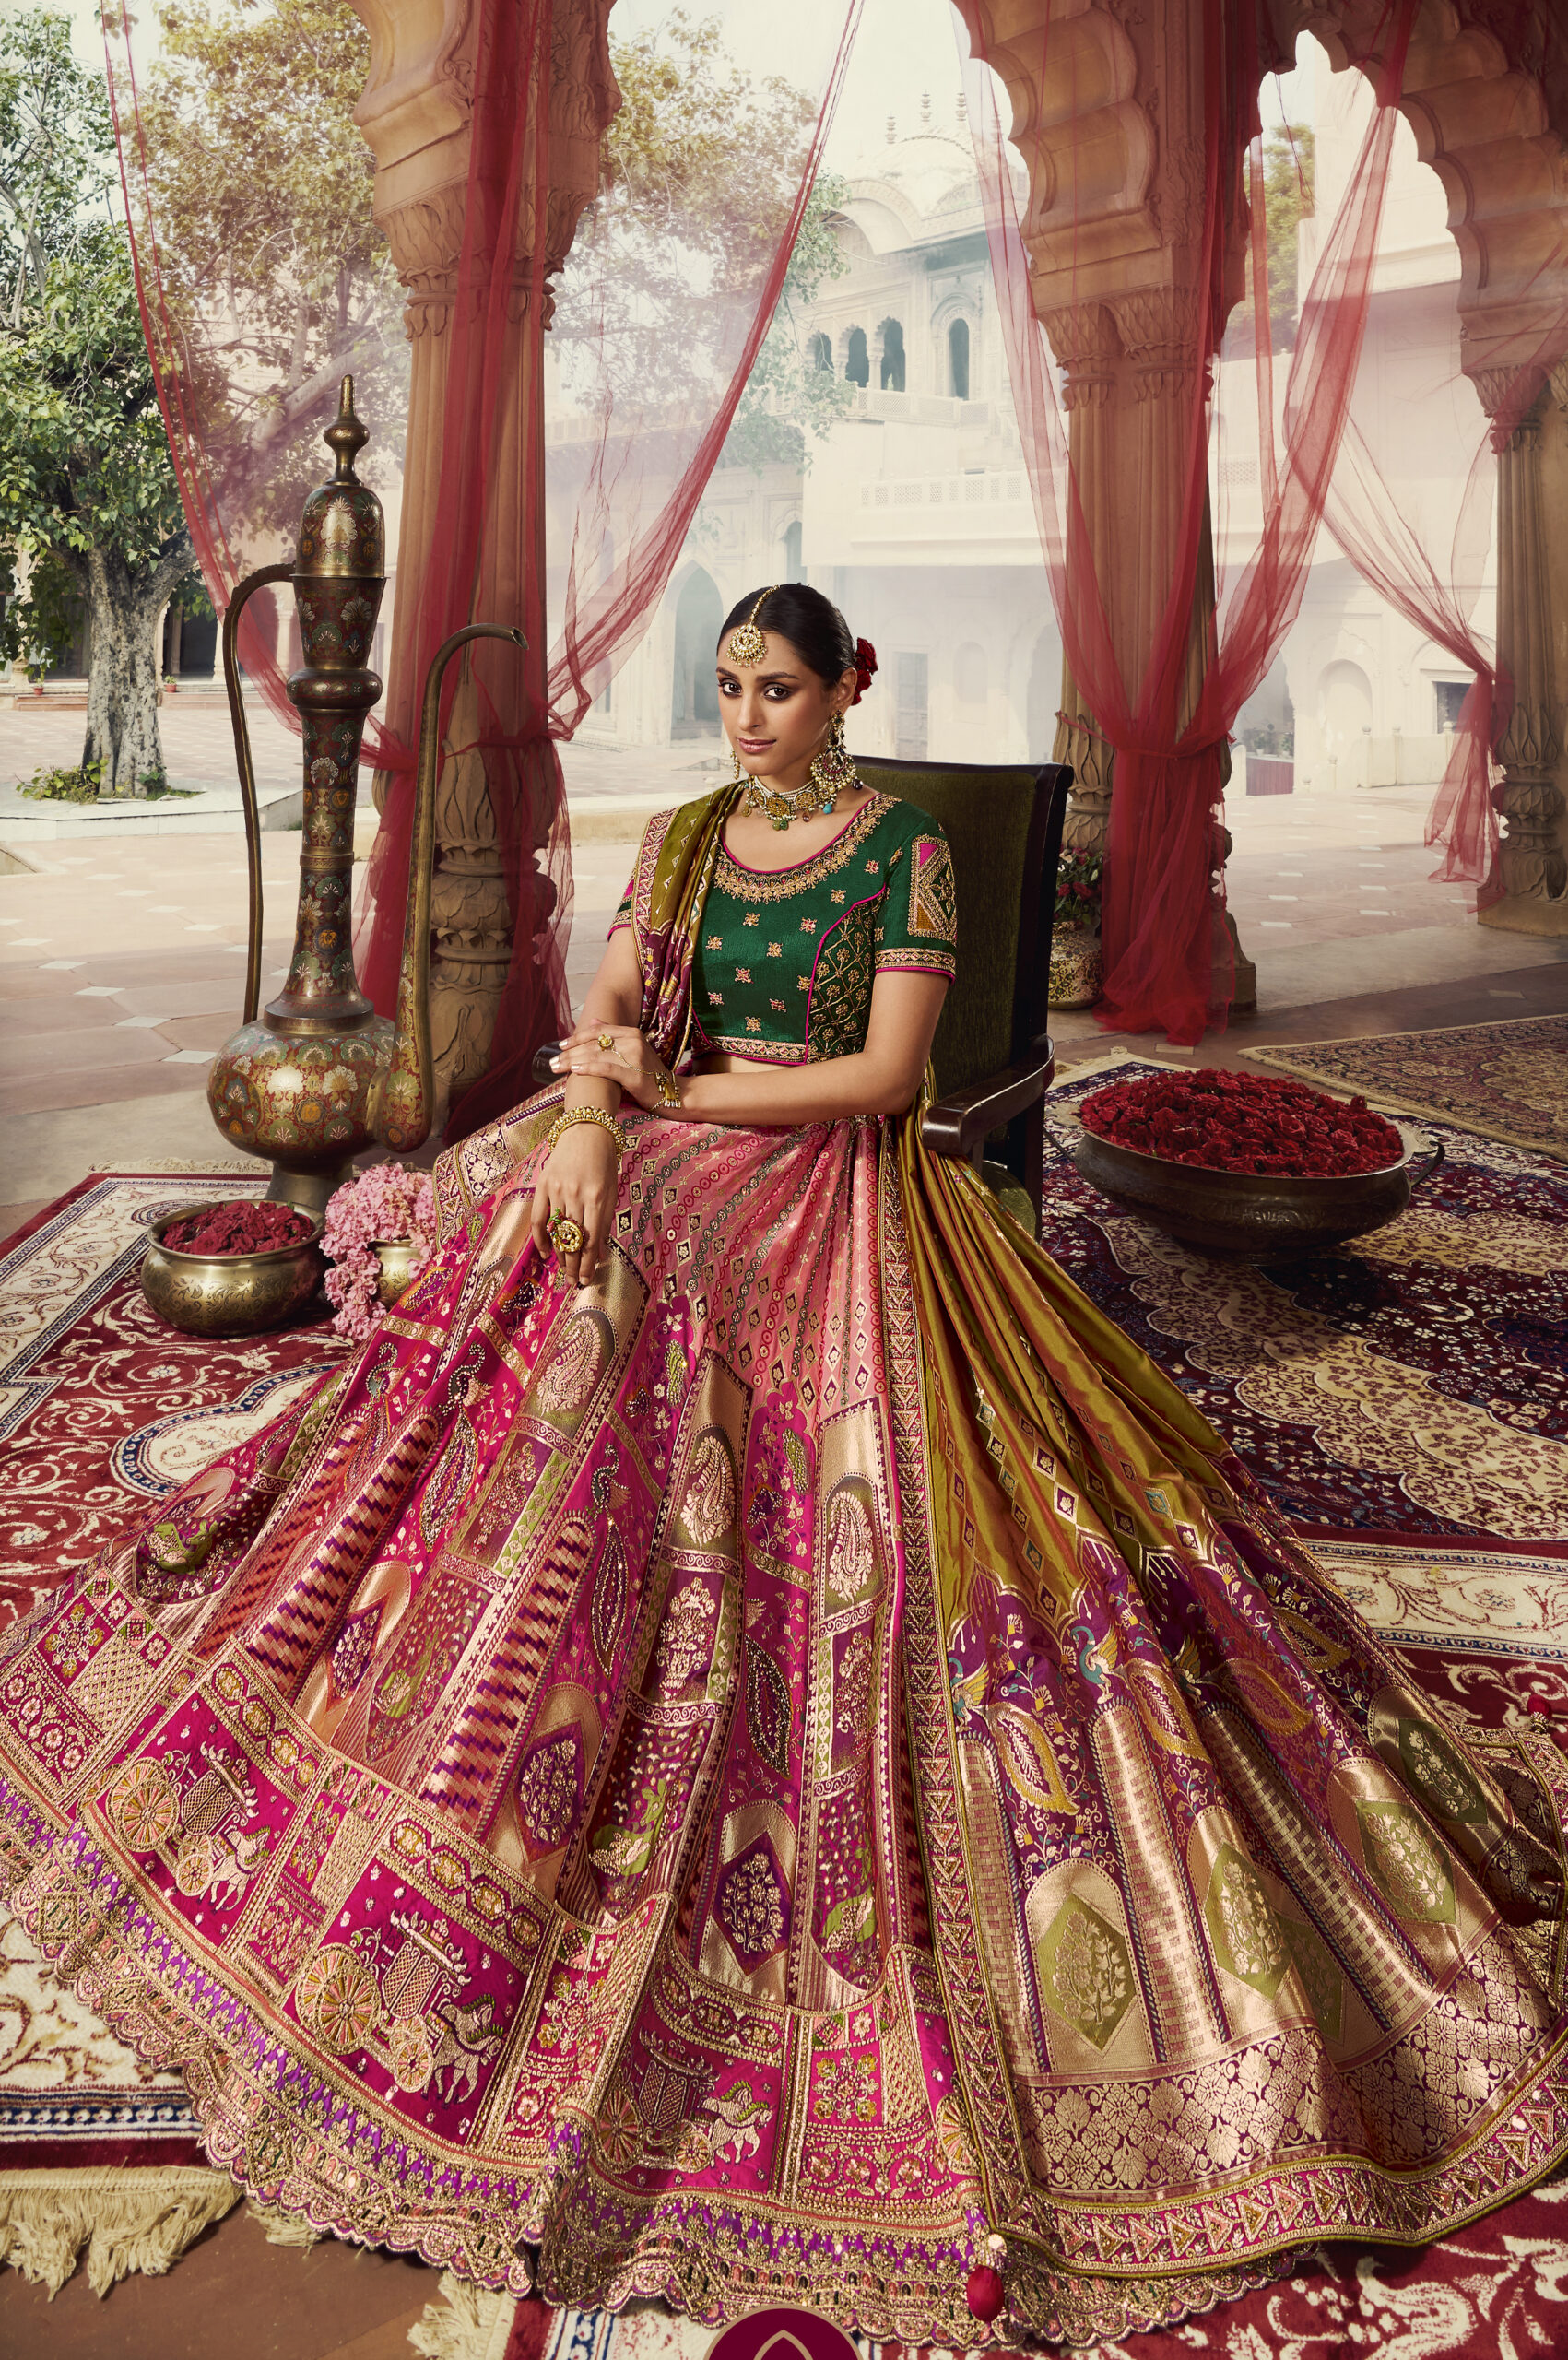 Pink and green colour combination#lehenga choli | Combination dresses, Green  color combinations, Choli designs